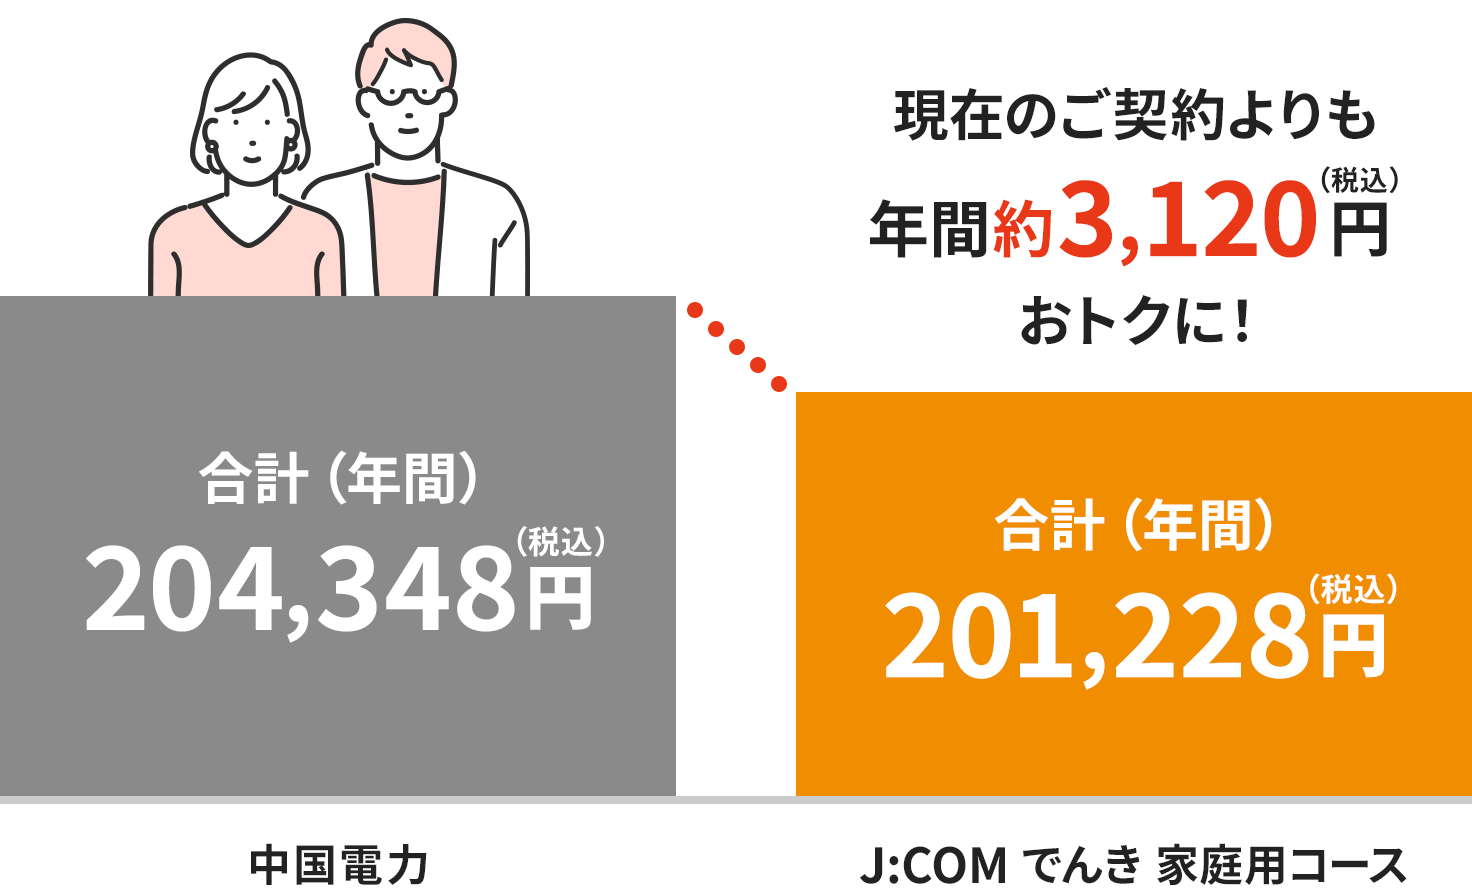 Image of charges in the Chugoku Electric Power area (for a two-person household)